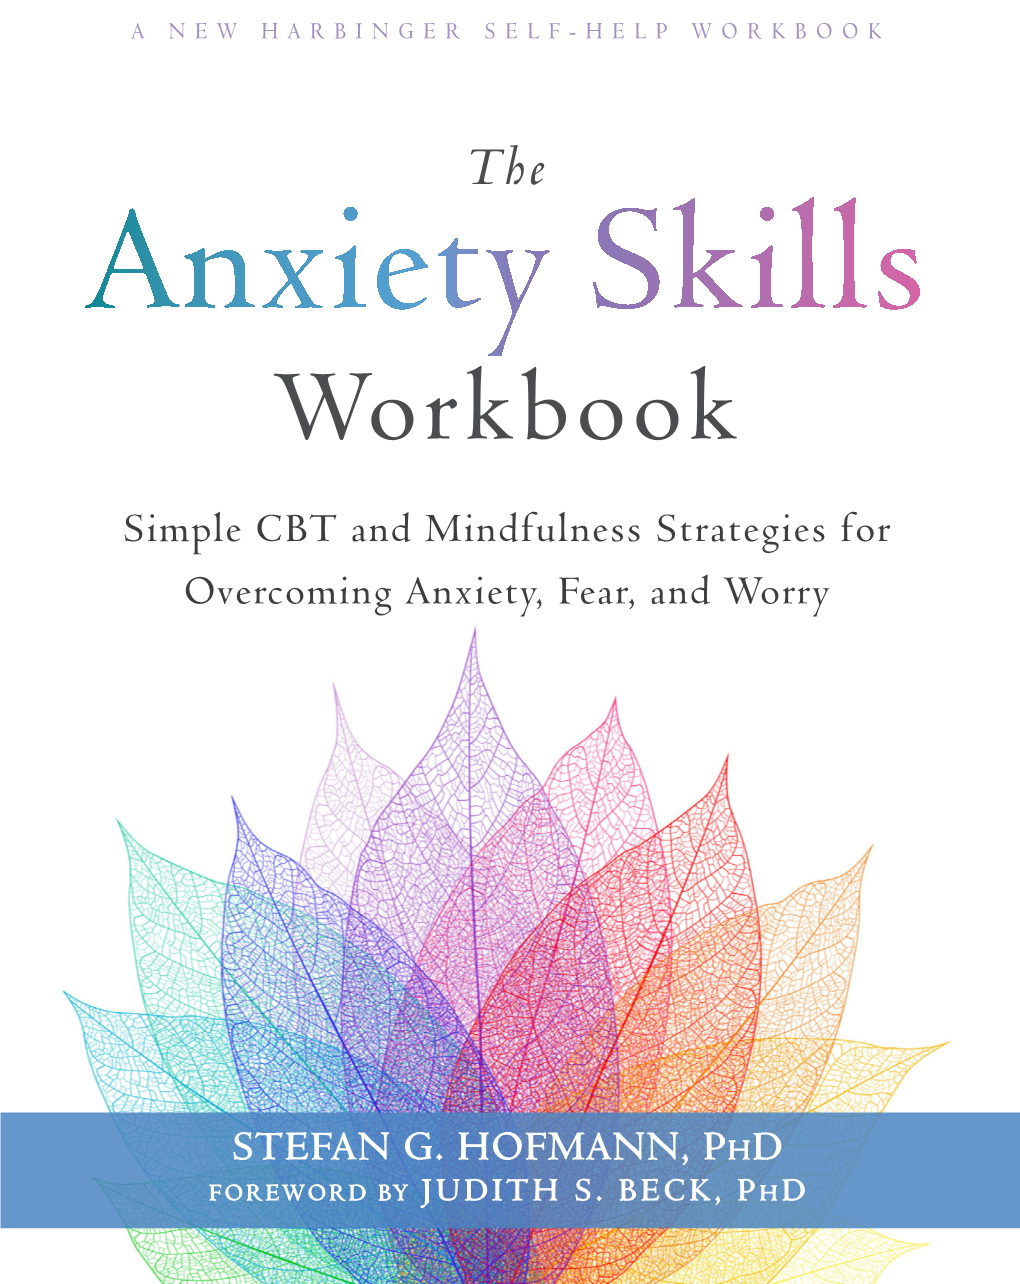 The Anxiety Skills Workbook, You’Ll Find Use…